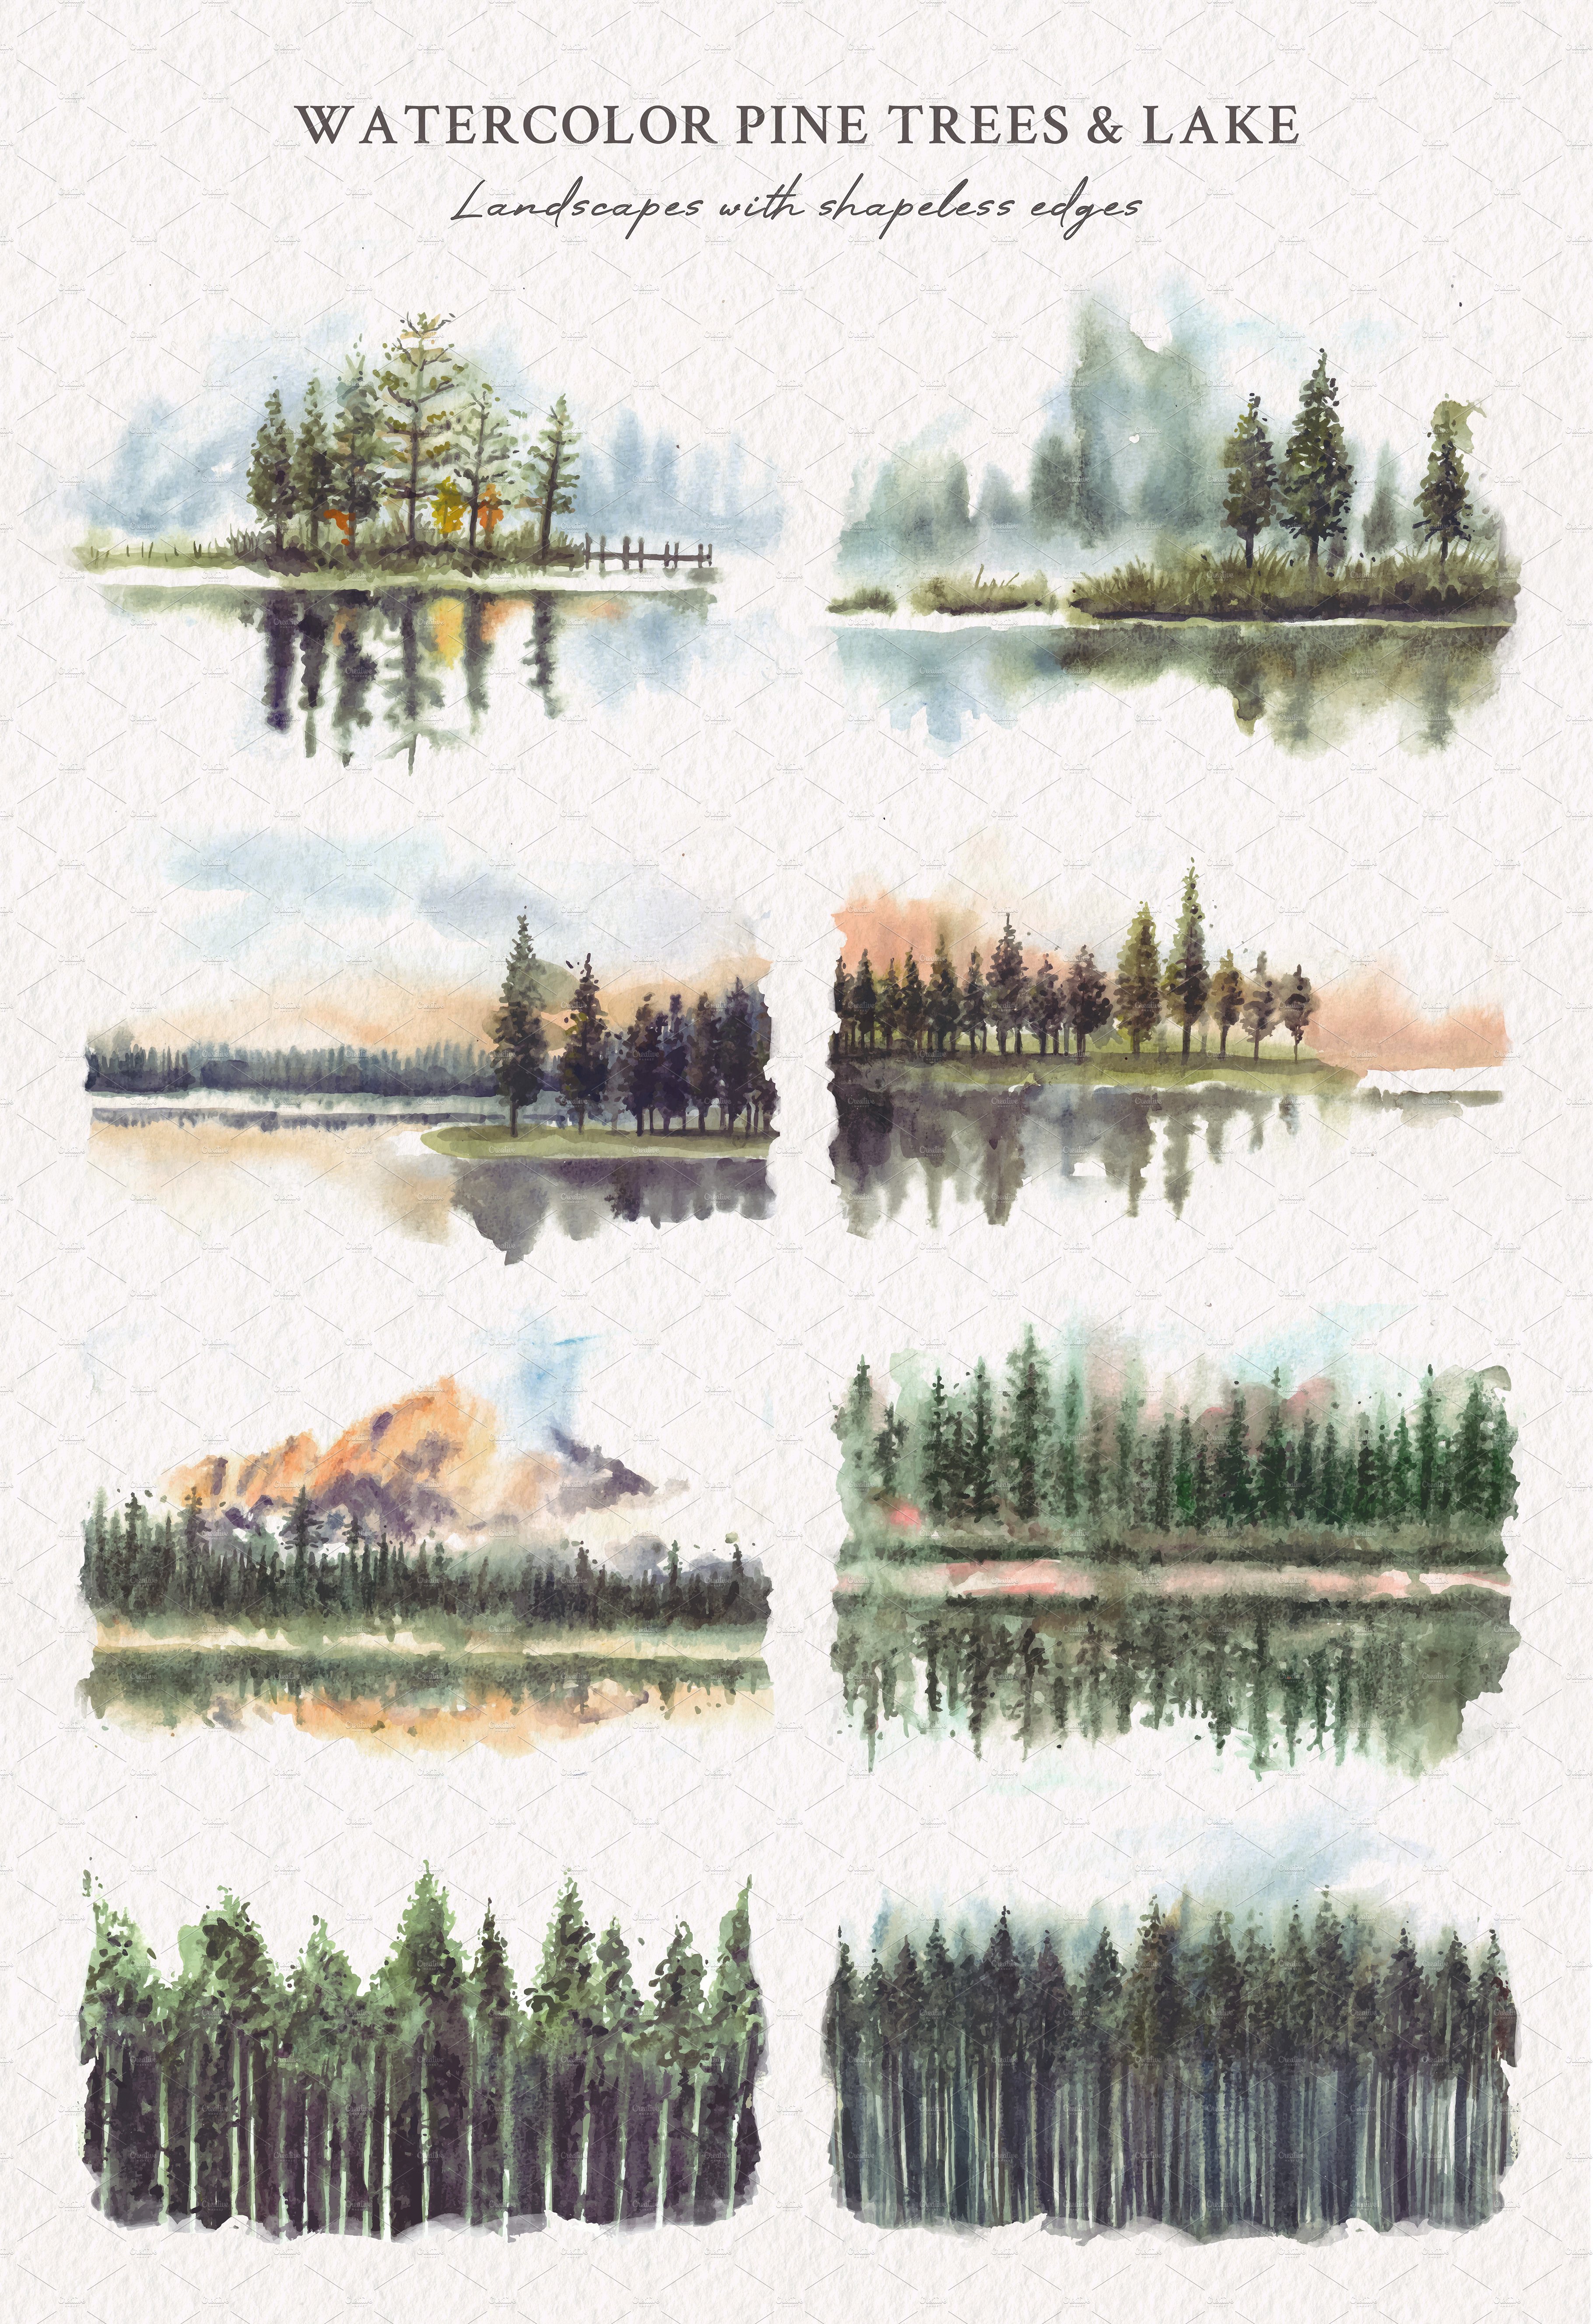 Watercolor Pine Trees & Lake preview image.